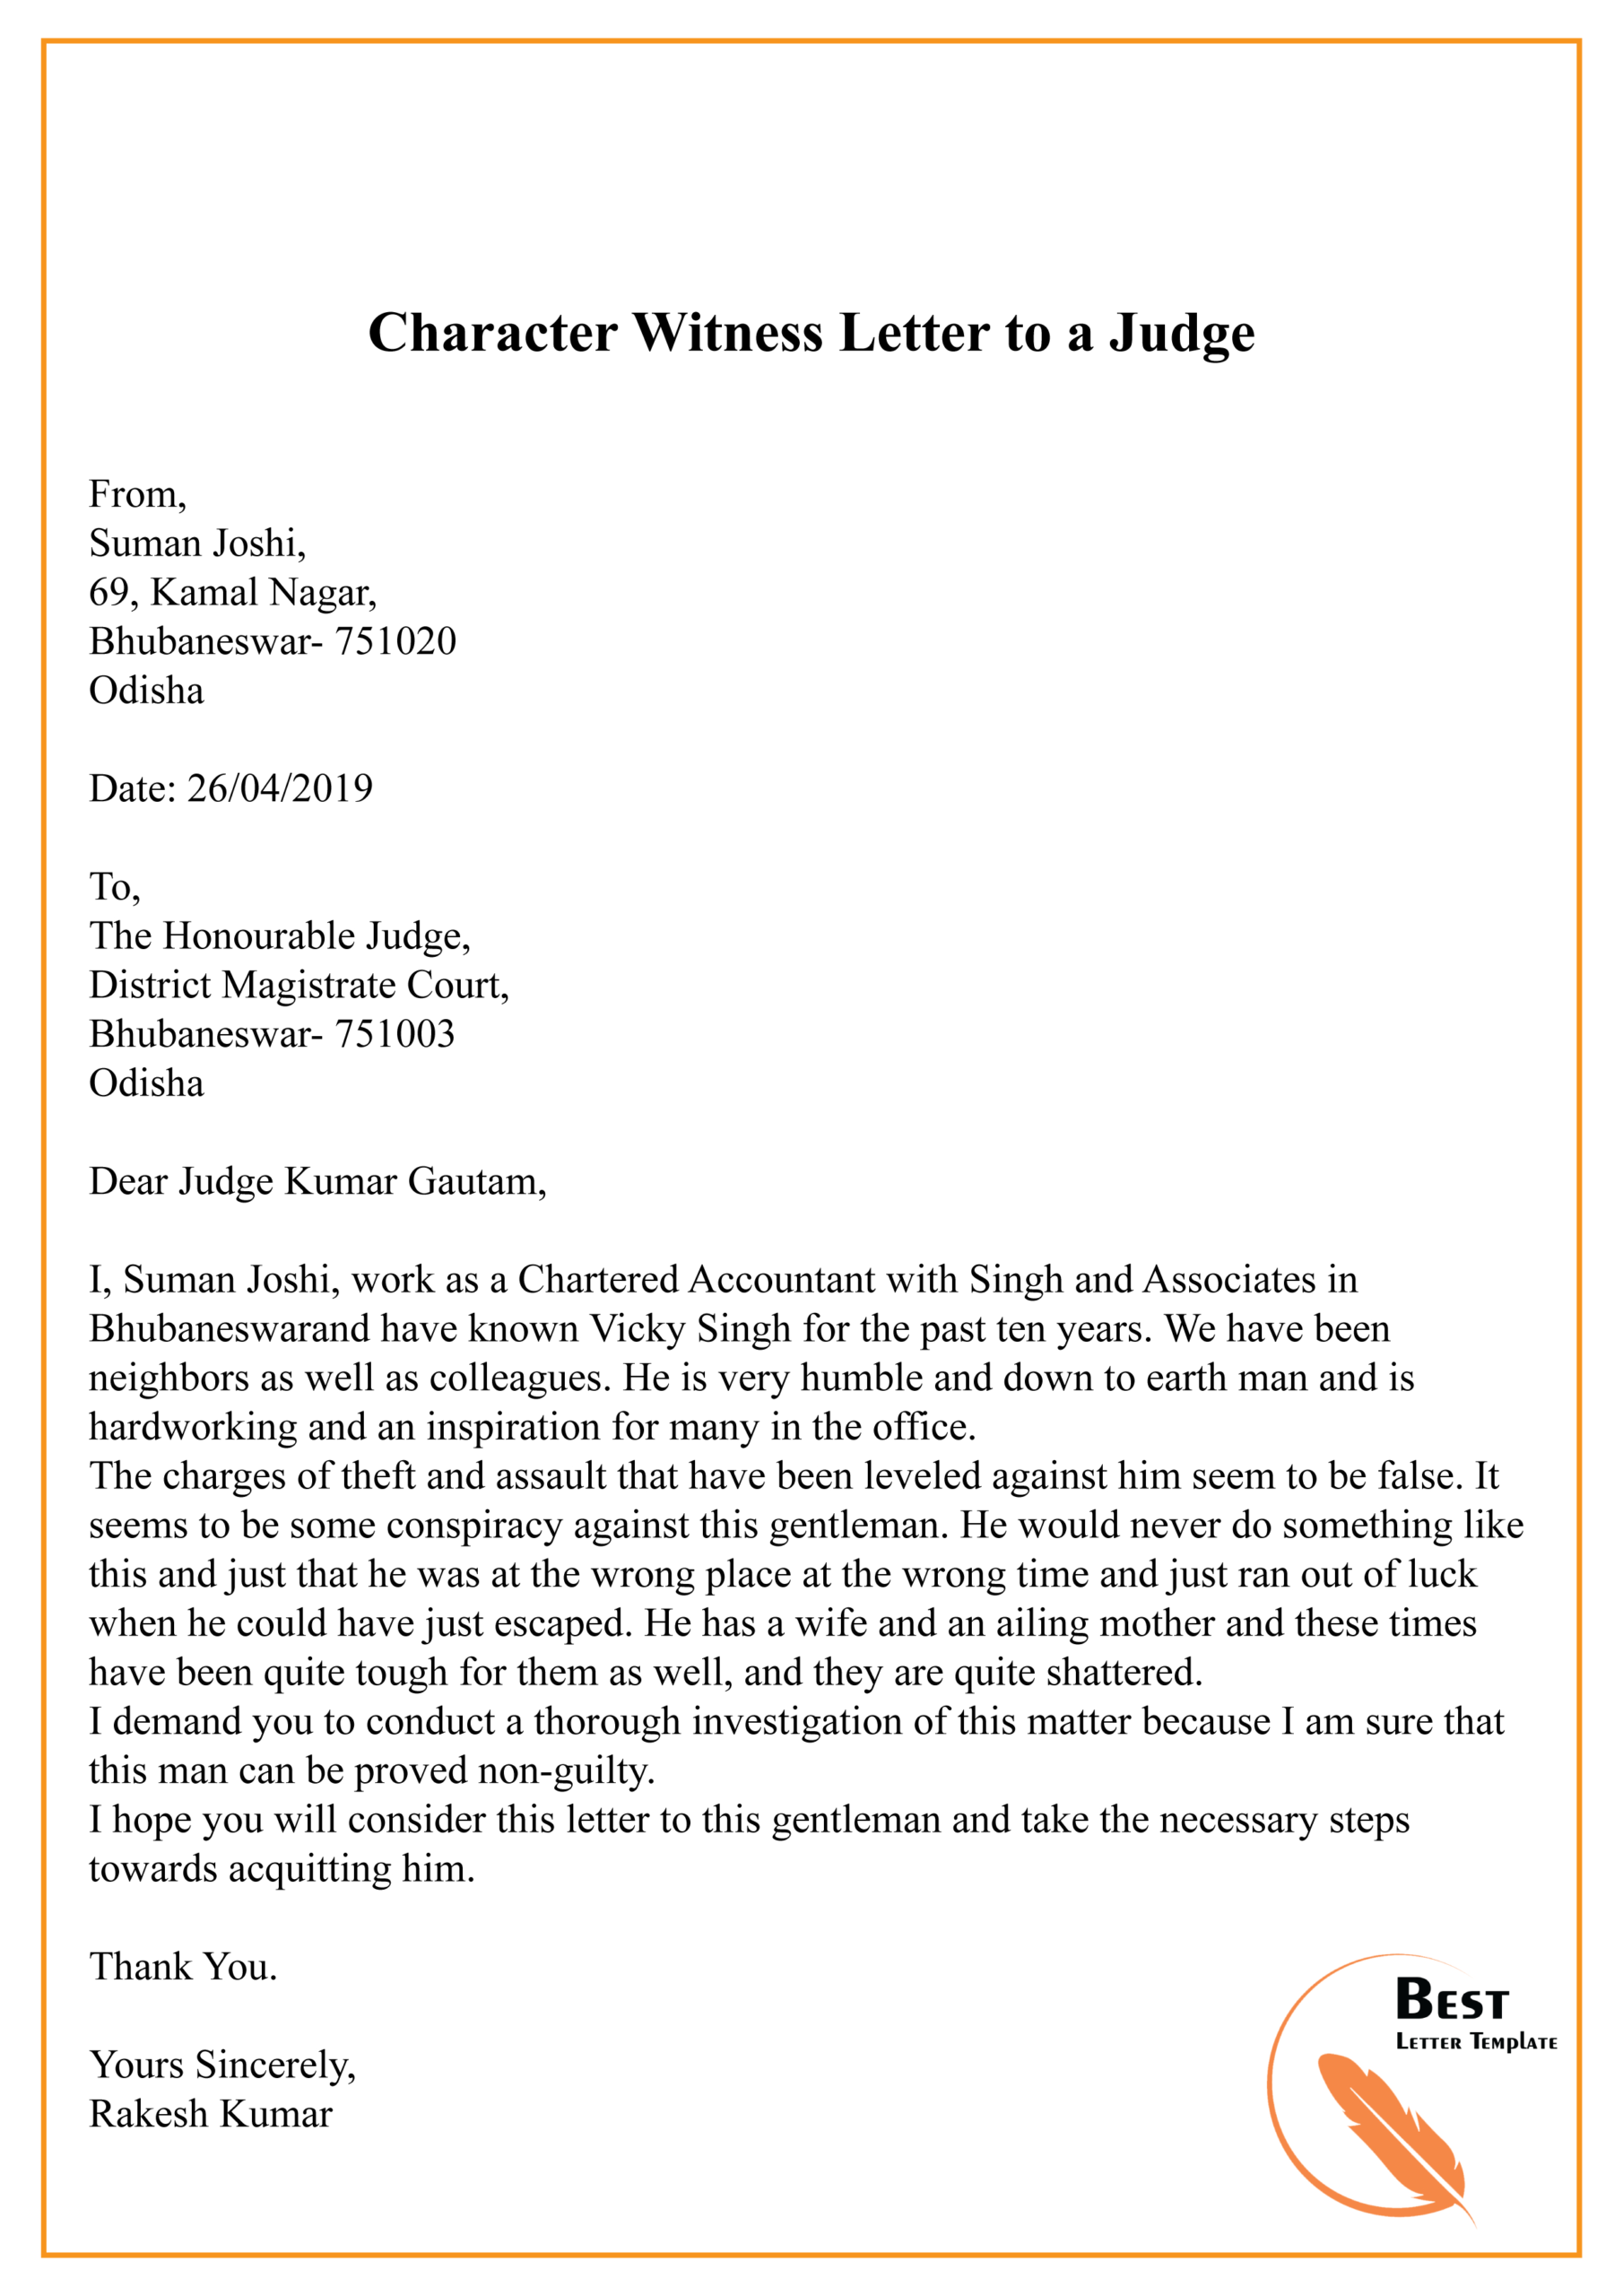 Character Witness Letter To A Judge 01 | Best Letter Template With Letter To A Judge Template